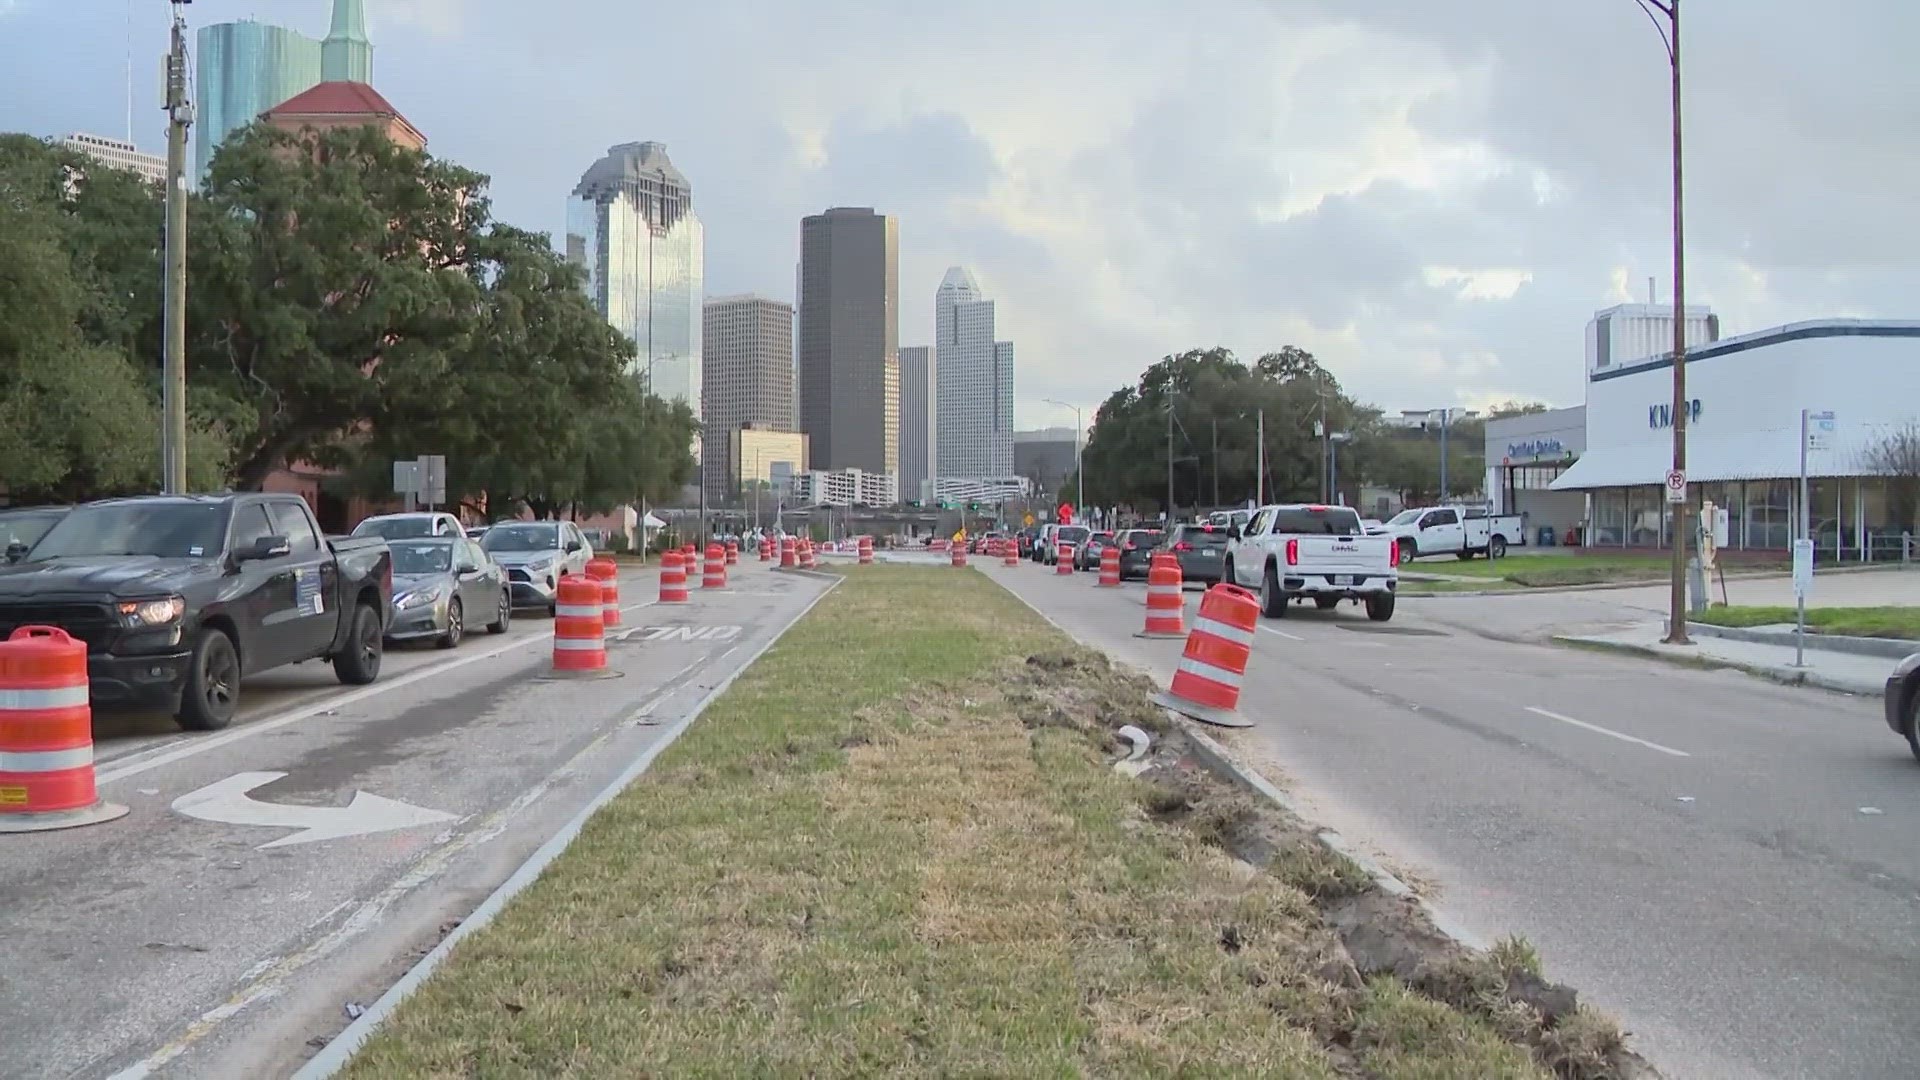 The city said the medians are problematic because they reduce lane capacity and restrict access to businesses and places of worship along Houston Avenue.